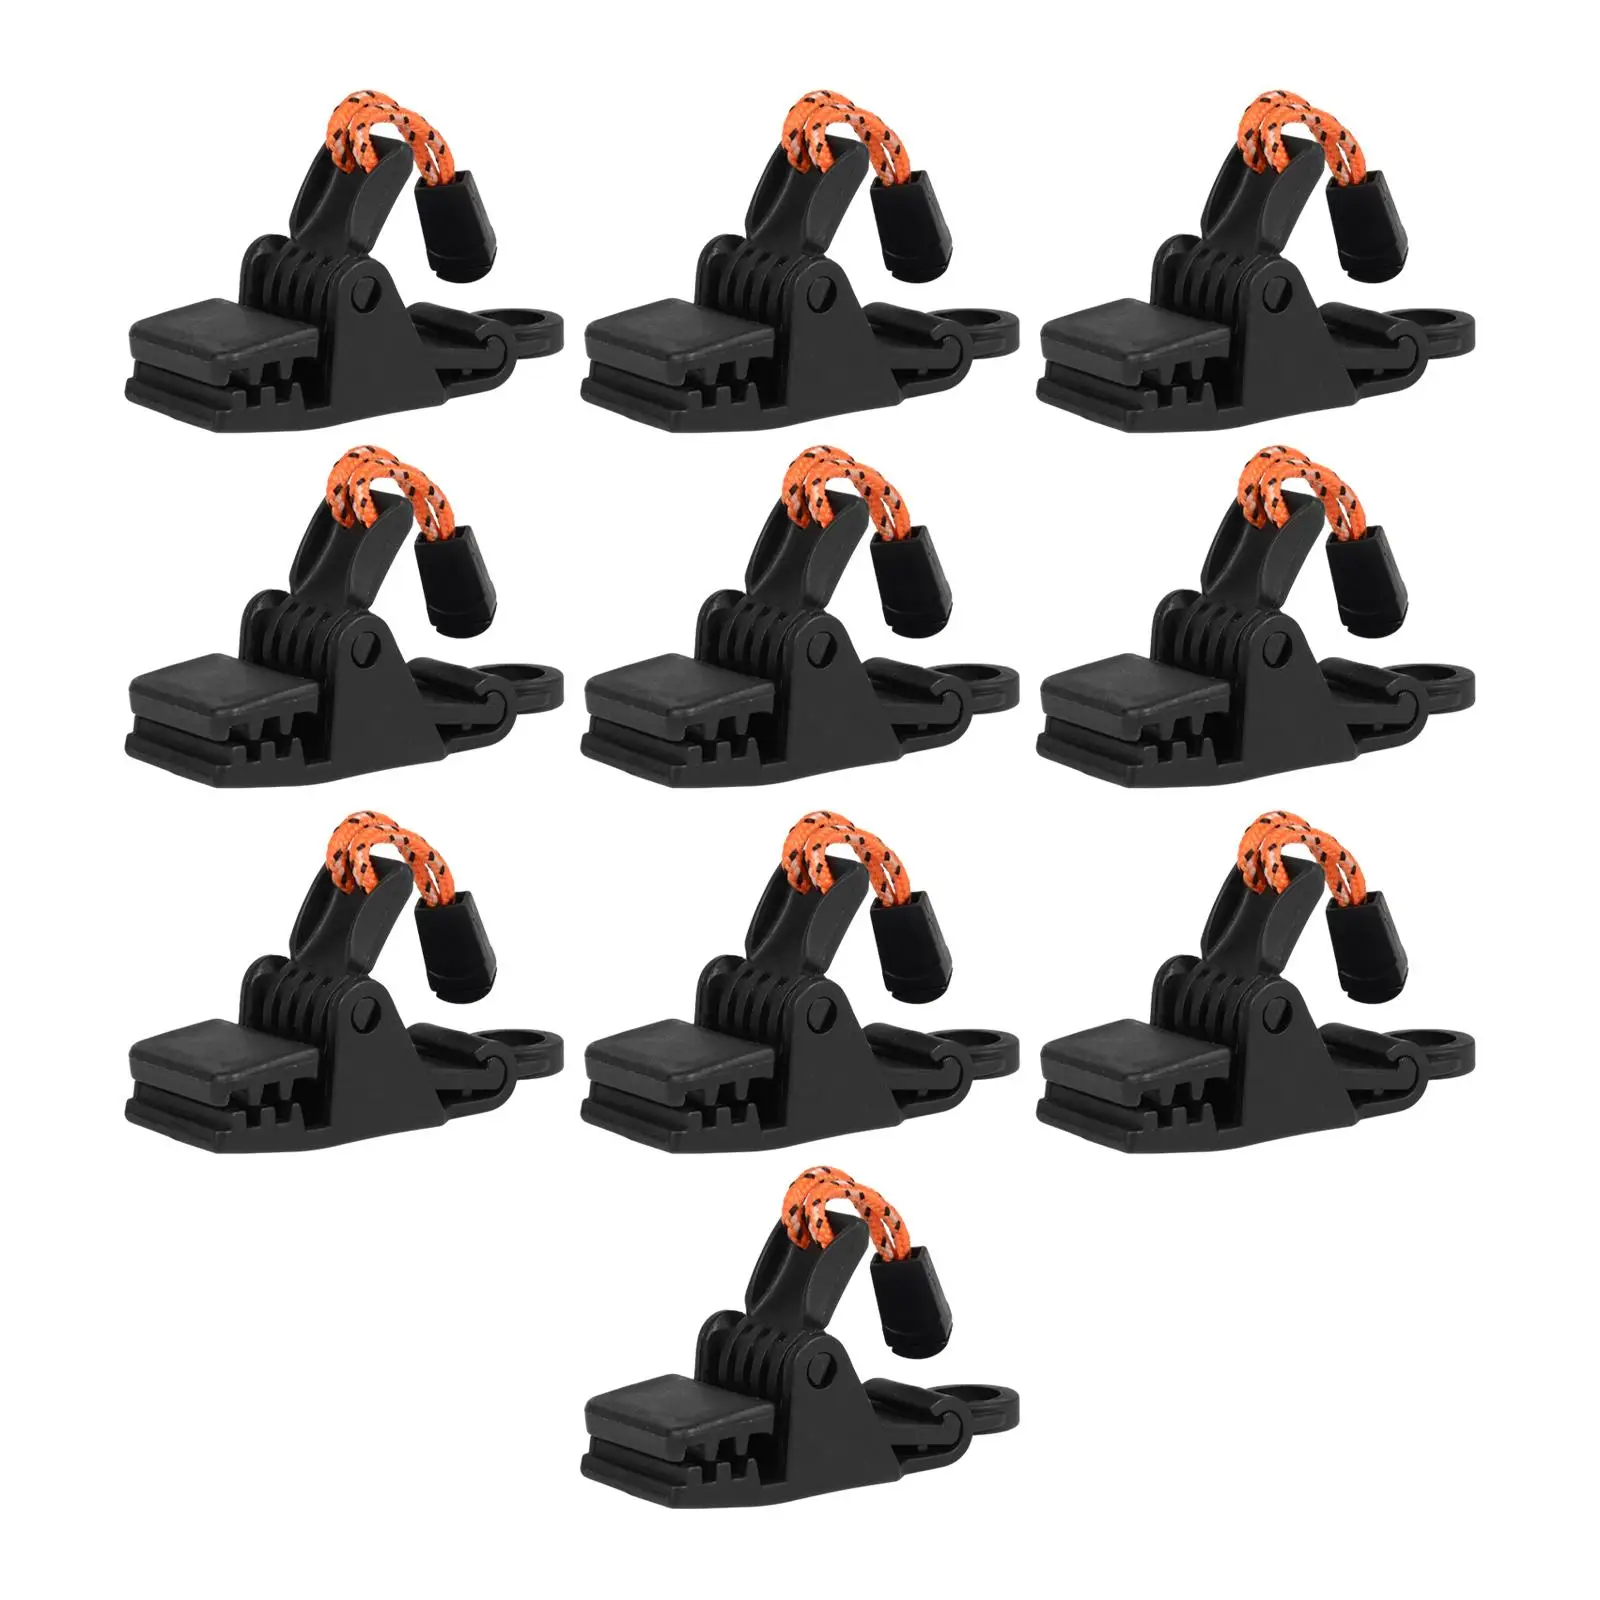 10Pcs Tarp Clips Tent Fasteners Sturdy Load Bearing Lock Grip Awning Clamps Canopy for Fixing Awnings Fishing Canopies Camping